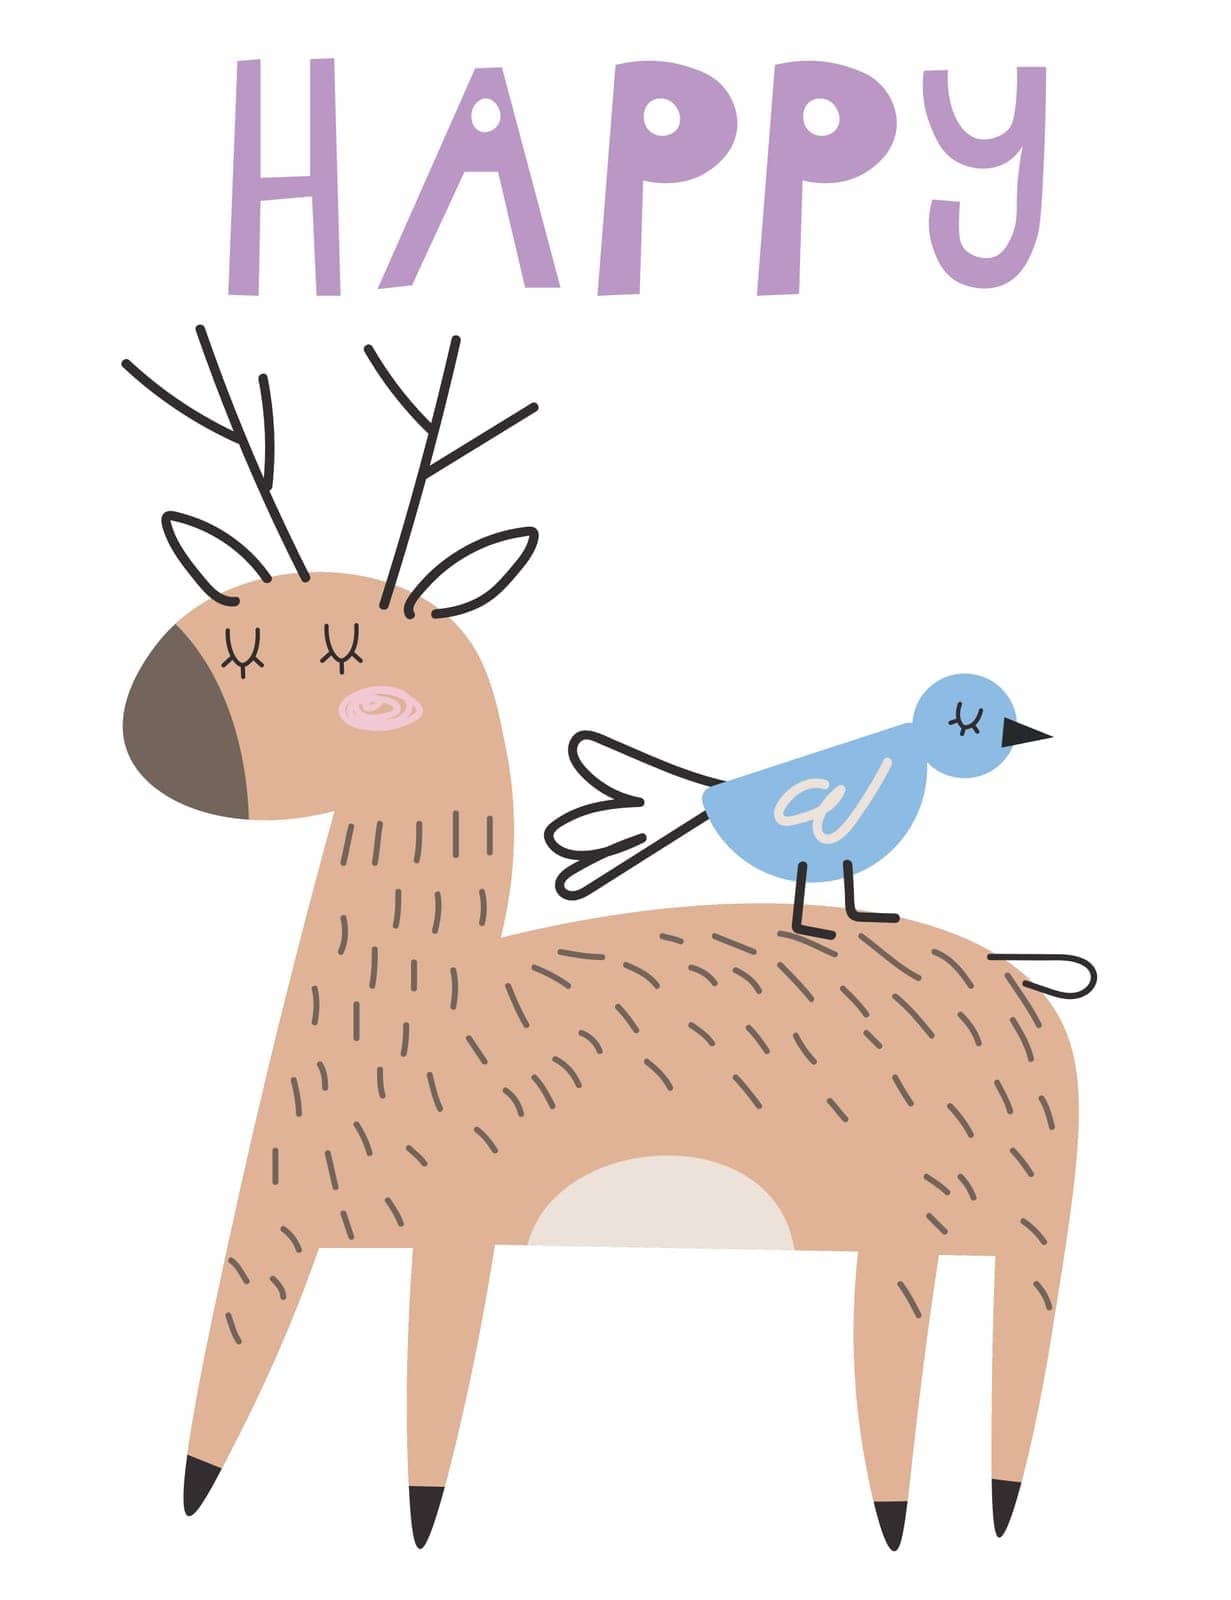 Cute deer with bird hand drawn animal illustration on whith background with text Happy Scandinavian cartoon style. For web, posters, invitations, postcards, greeting cards, flyers, etc.